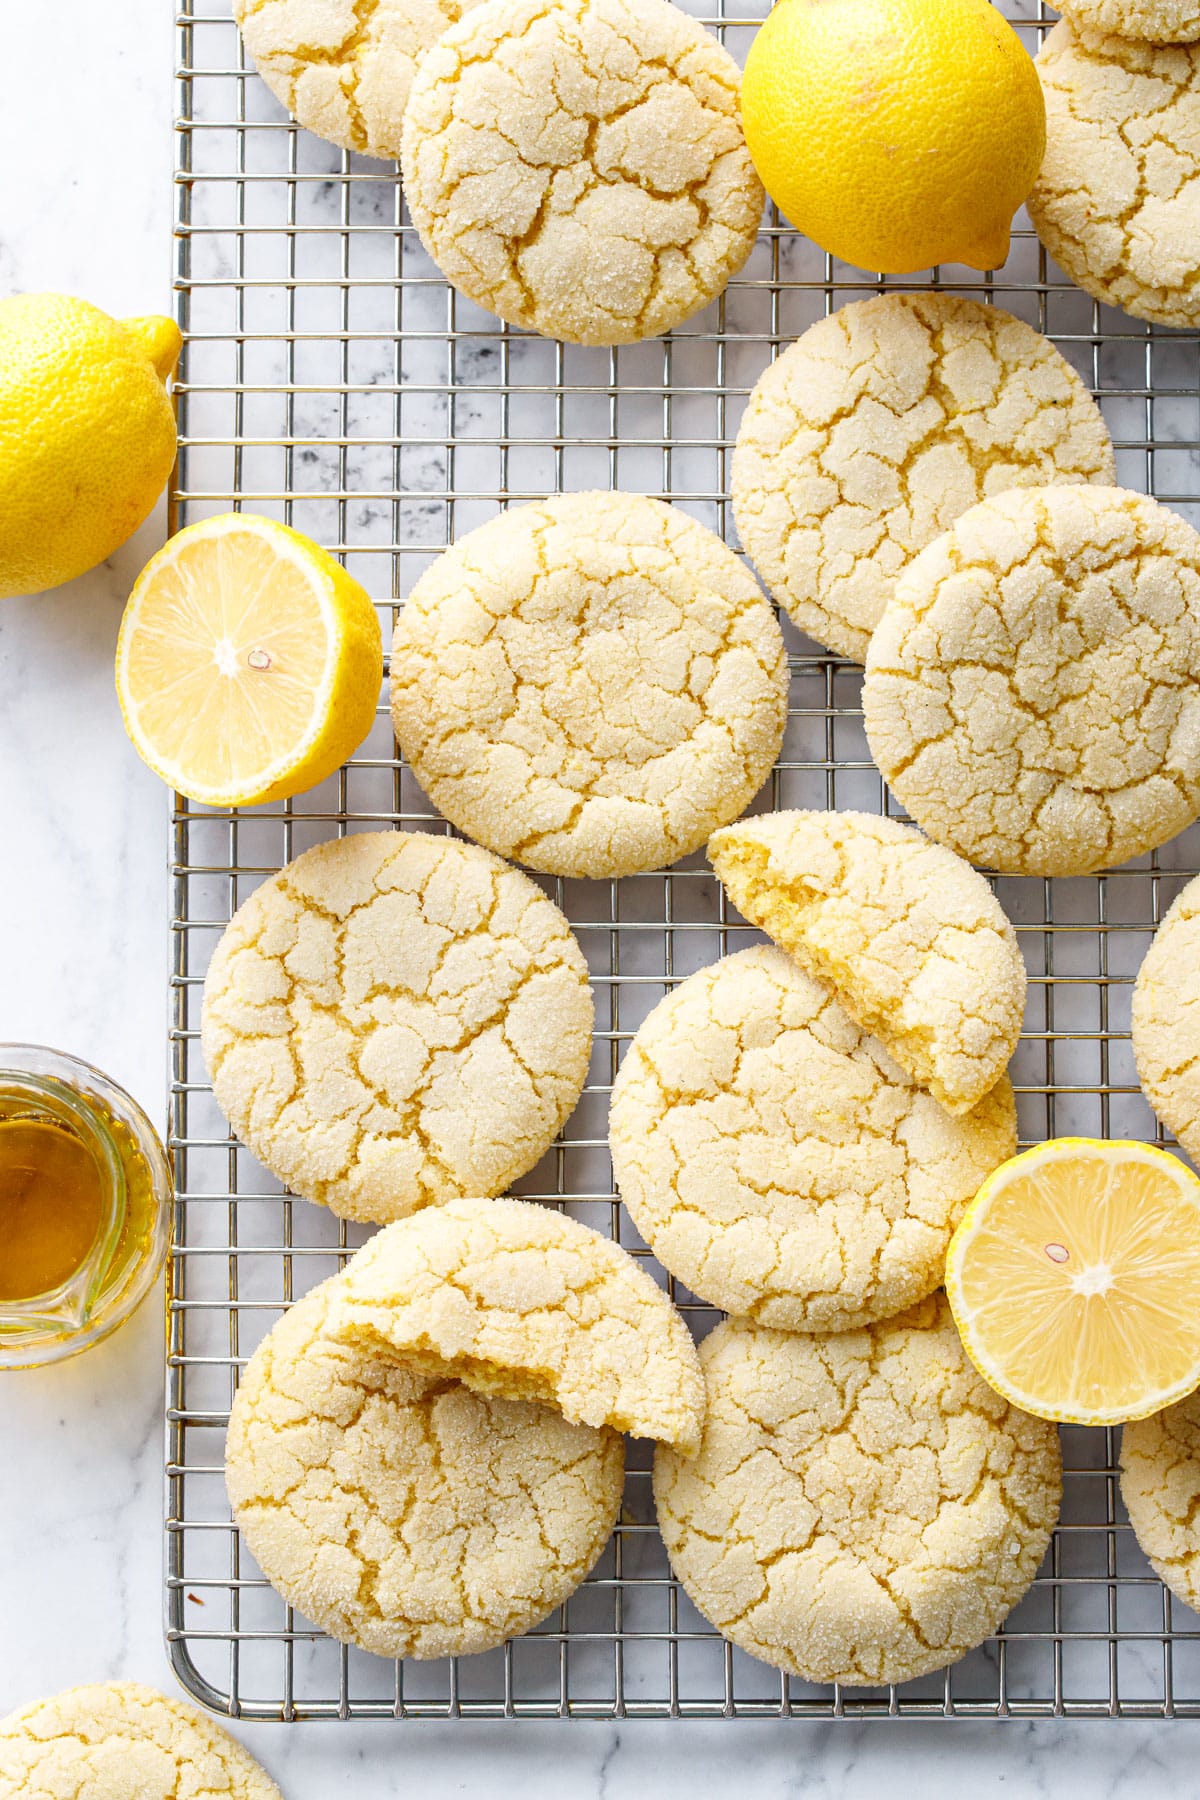 Overhead, Lemon Olive Oil Sugar Cookies on a wire baking rack, haphazardly arranged with whole and cut lemons and a dish of olive oil.